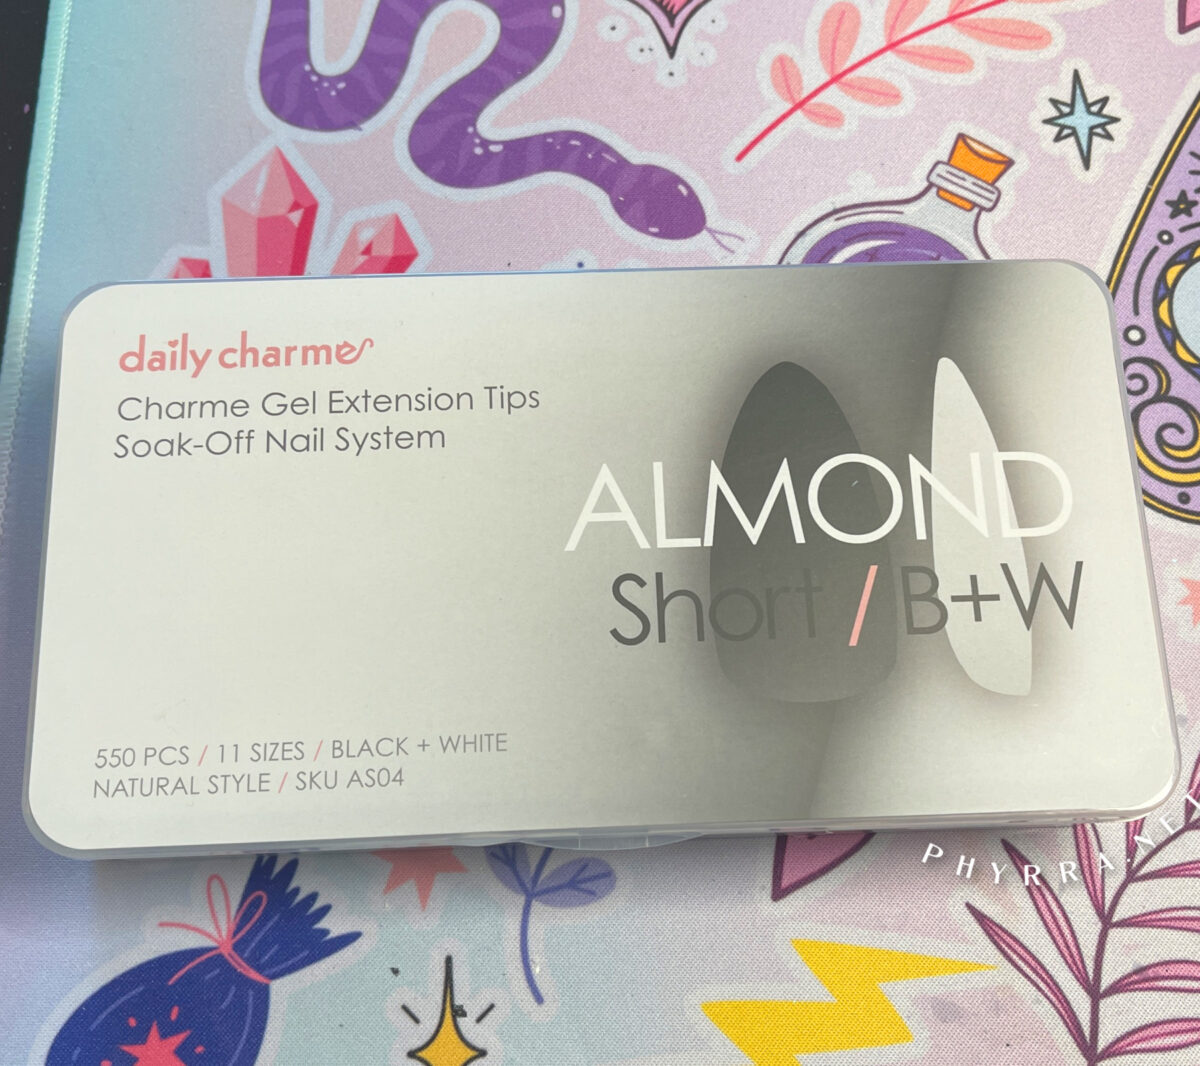 A box of Daily Charme Black and White Almond Tips